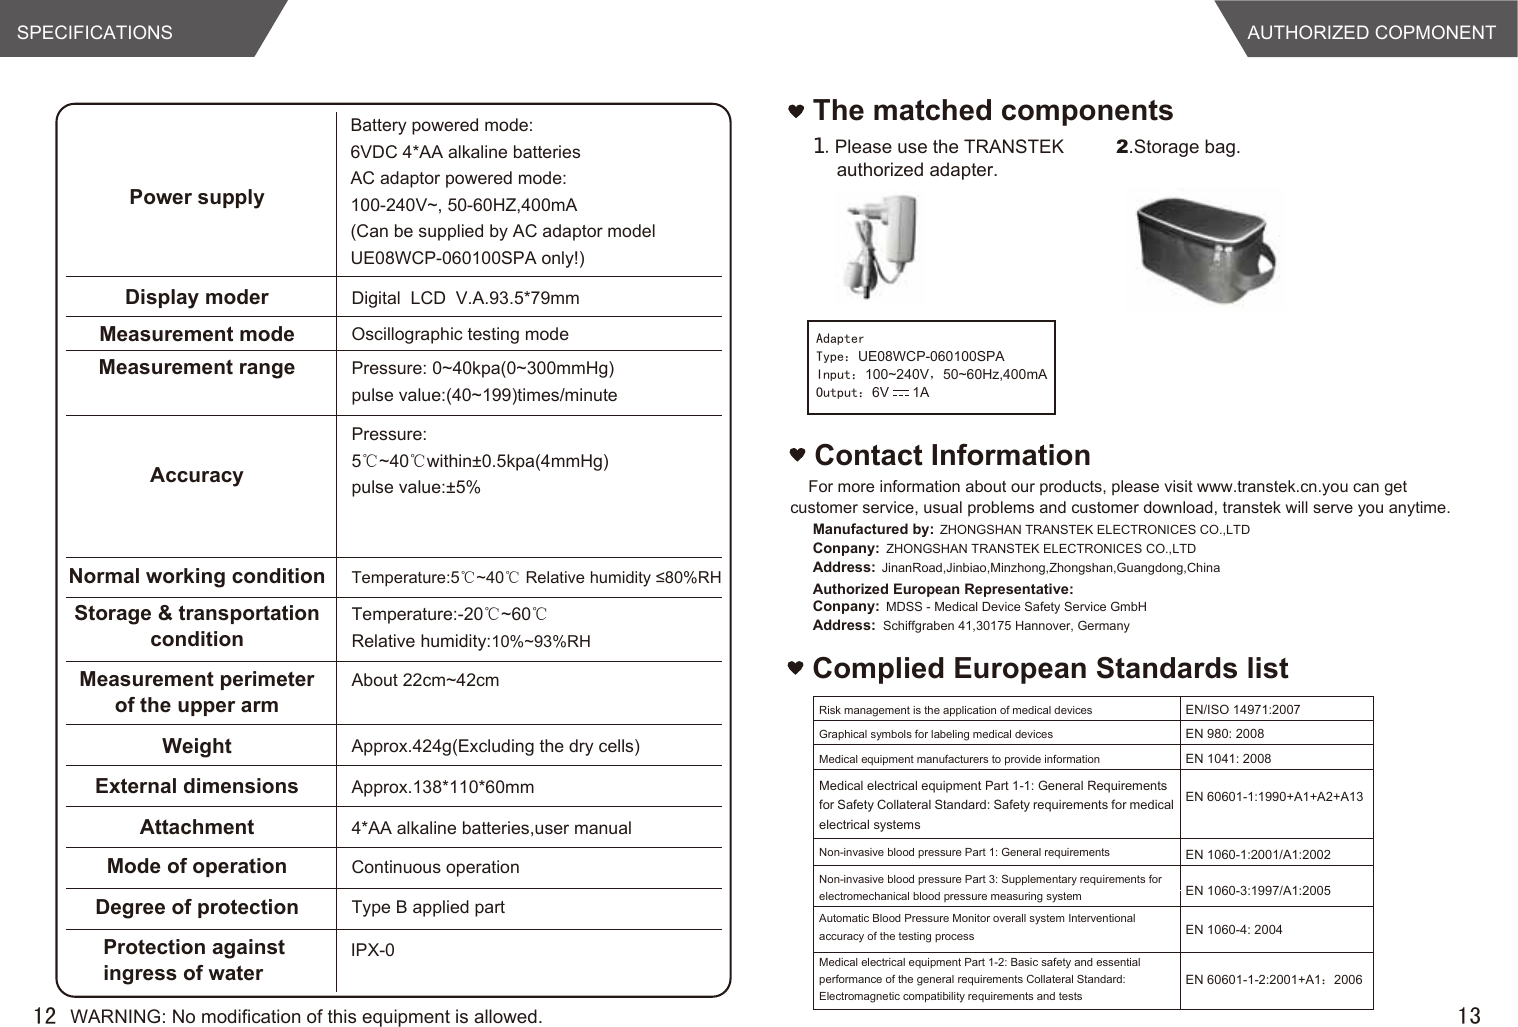 AUTHORIZED COPMONENT13The matched components１.Please use the TRANSTEK authorized adapter.2.Storage bag.12SPECIFICATIONSComplied European Standards listAdapterType：UE08WCP-060100SPAInput：100~240V，50~60Hz,400mAOutput：6V      1APower supplyBattery powered mode: 6VDC 4*AA alkaline batteriesAC adaptor powered mode:100-240V~, 50-60HZ,400mA(Can be supplied by AC adaptor model UE08WCP-060100SPA only!)Display moder Digital  LCD  V.A.93.5*79mmMeasurement mode Oscillographic testing modeMeasurement range Pressure: 0~40kpa(0~300mmHg)pulse value:(40~199)times/minuteAccuracyPressure:5℃~40℃within±0.5kpa(4mmHg) pulse value:±5%Normal working condition Temperature:5℃~40℃ Relative humidity ≤80%RHStorage &amp; transportationconditionTemperature:-20℃~60℃Relative humidity:10%~93%RHMeasurement perimeterof the upper armAbout 22cm~42cmWeight Approx.424g(Excluding the dry cells)External dimensionsAttachmentApprox.138*110*60mm4*AA alkaline batteries,user manual  Mode of operation Continuous operationDegree of protection Type B applied partProtection against ingress of waterIPX-0Risk management is the application of medical devices EN/ISO 14971:2007 Graphical symbols for labeling medical devices EN 980: 2008 Medical equipment manufacturers to provide information EN 1041: 2008   Medical electrical equipment Part 1-1: General Requirements for Safety Collateral Standard: Safety requirements for medical electrical systems  EN 60601-1:1990+A1+A2+A13 Non-invasive blood pressure Part 1: General requirements  EN 1060-1:2001/A1:2002 Non-invasive blood pressure Part 3: Supplementary requirements for electromechanical blood pressure measuring system  EN 1060-3:1997/A1:2005 Automatic Blood Pressure Monitor overall system Interventional accuracy of the testing process  EN 1060-4: 2004 Medical electrical equipment Part 1-2: Basic safety and essential performance of the general requirements Collateral Standard: Electromagnetic compatibility requirements and tests EN 60601-1-2:2001+A1：2006 WARNING: No modification of this equipment is allowed.For more information about our products, please visit www.transtek.cn.you can get customer service, usual problems and customer download, transtek will serve you anytime.Contact InformationAuthorized European Representative:Manufactured by: ZHONGSHAN TRANSTEK ELECTRONICES CO.,LTDConpany: ZHONGSHAN TRANSTEK ELECTRONICES CO.,LTDAddress: JinanRoad,Jinbiao,Minzhong,Zhongshan,Guangdong,ChinaConpany: MDSS - Medical Device Safety Service GmbHAddress: Schiffgraben 41,30175 Hannover, Germany